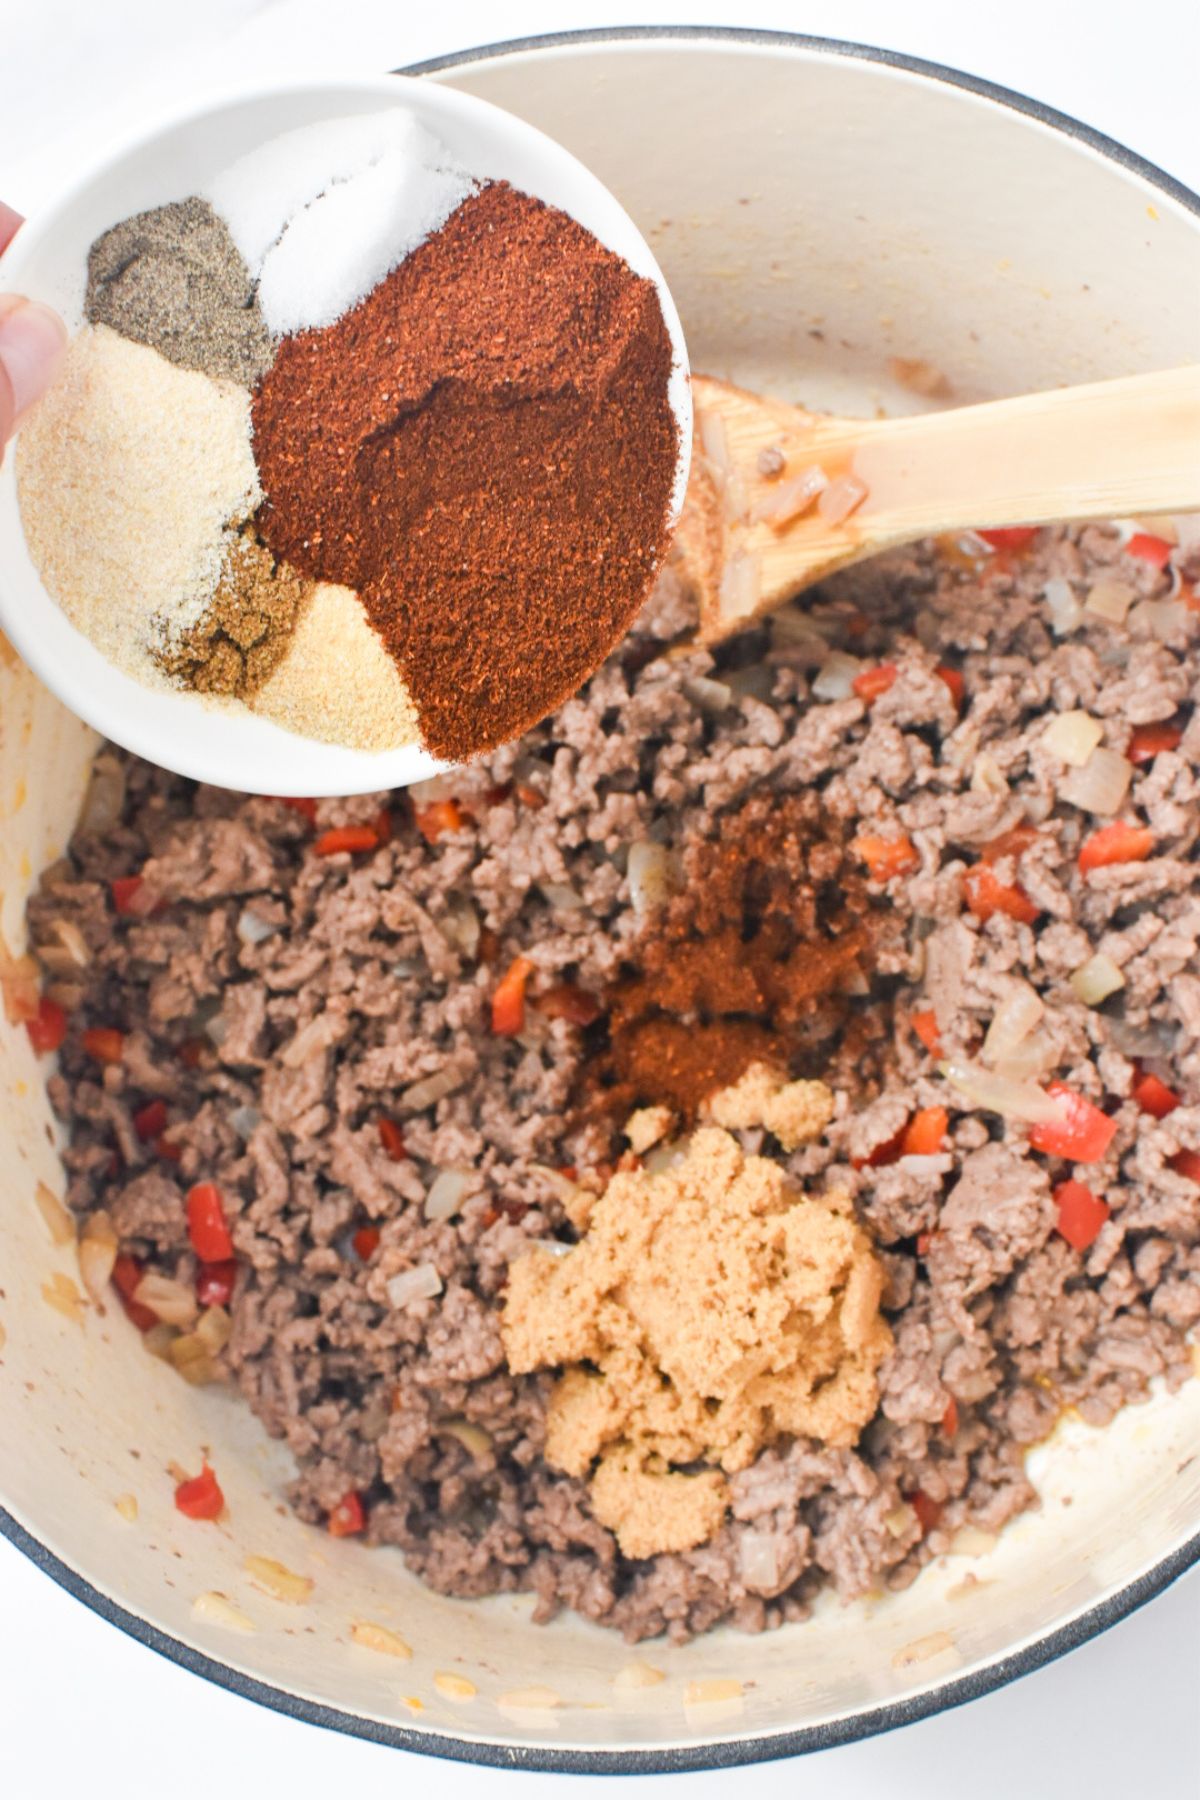 Spices are being added to browned ground beef.